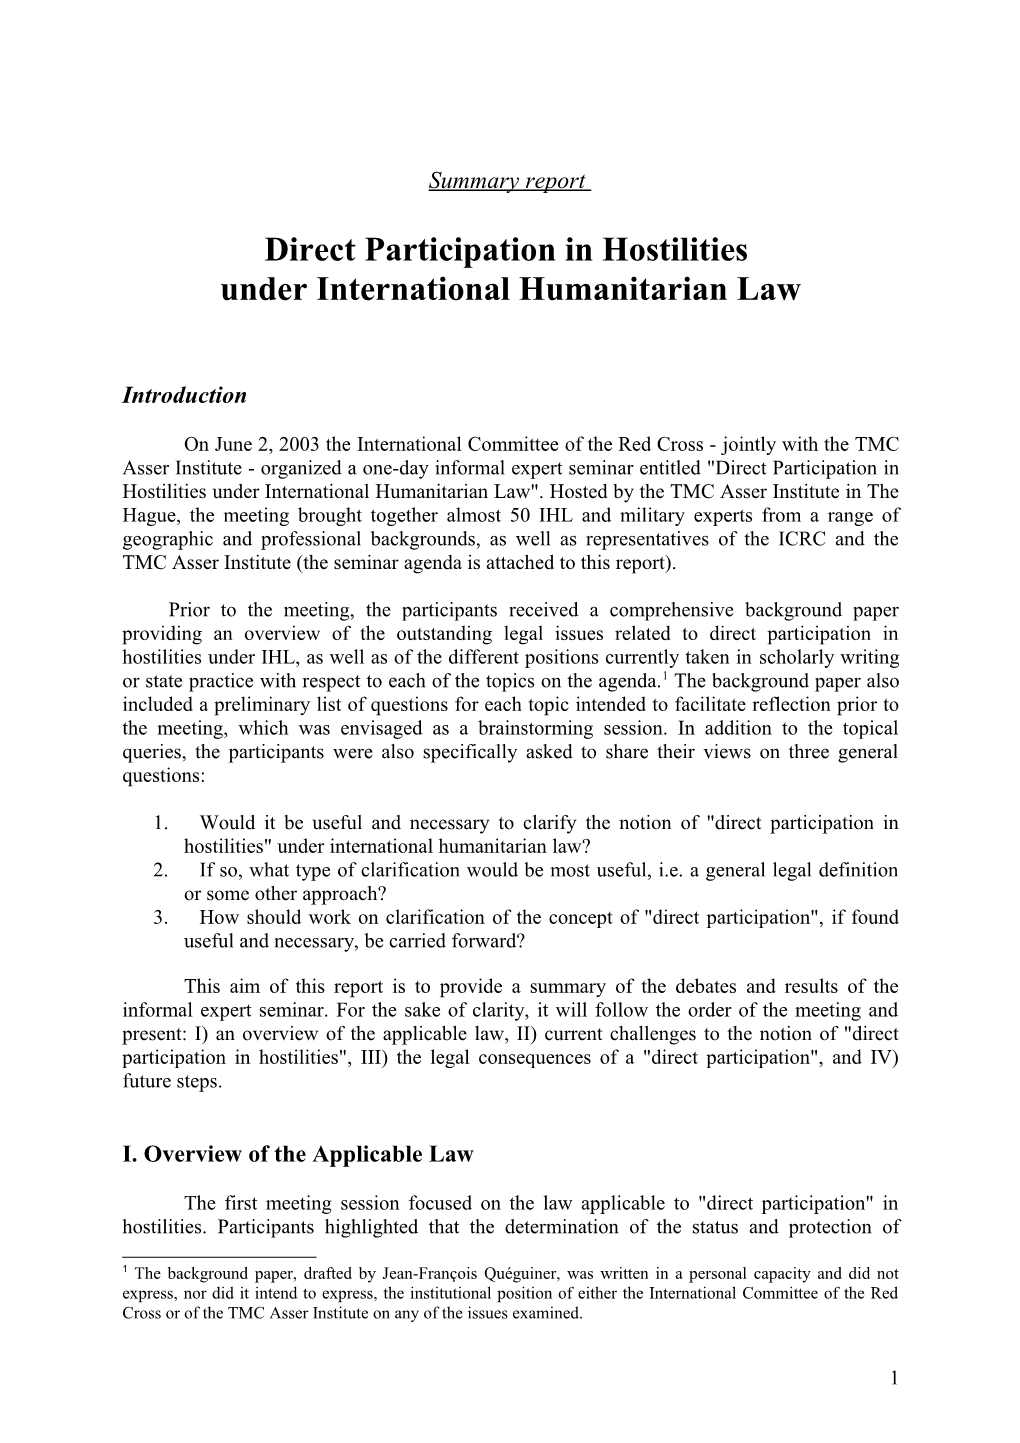 Direct Participation in Hostilities